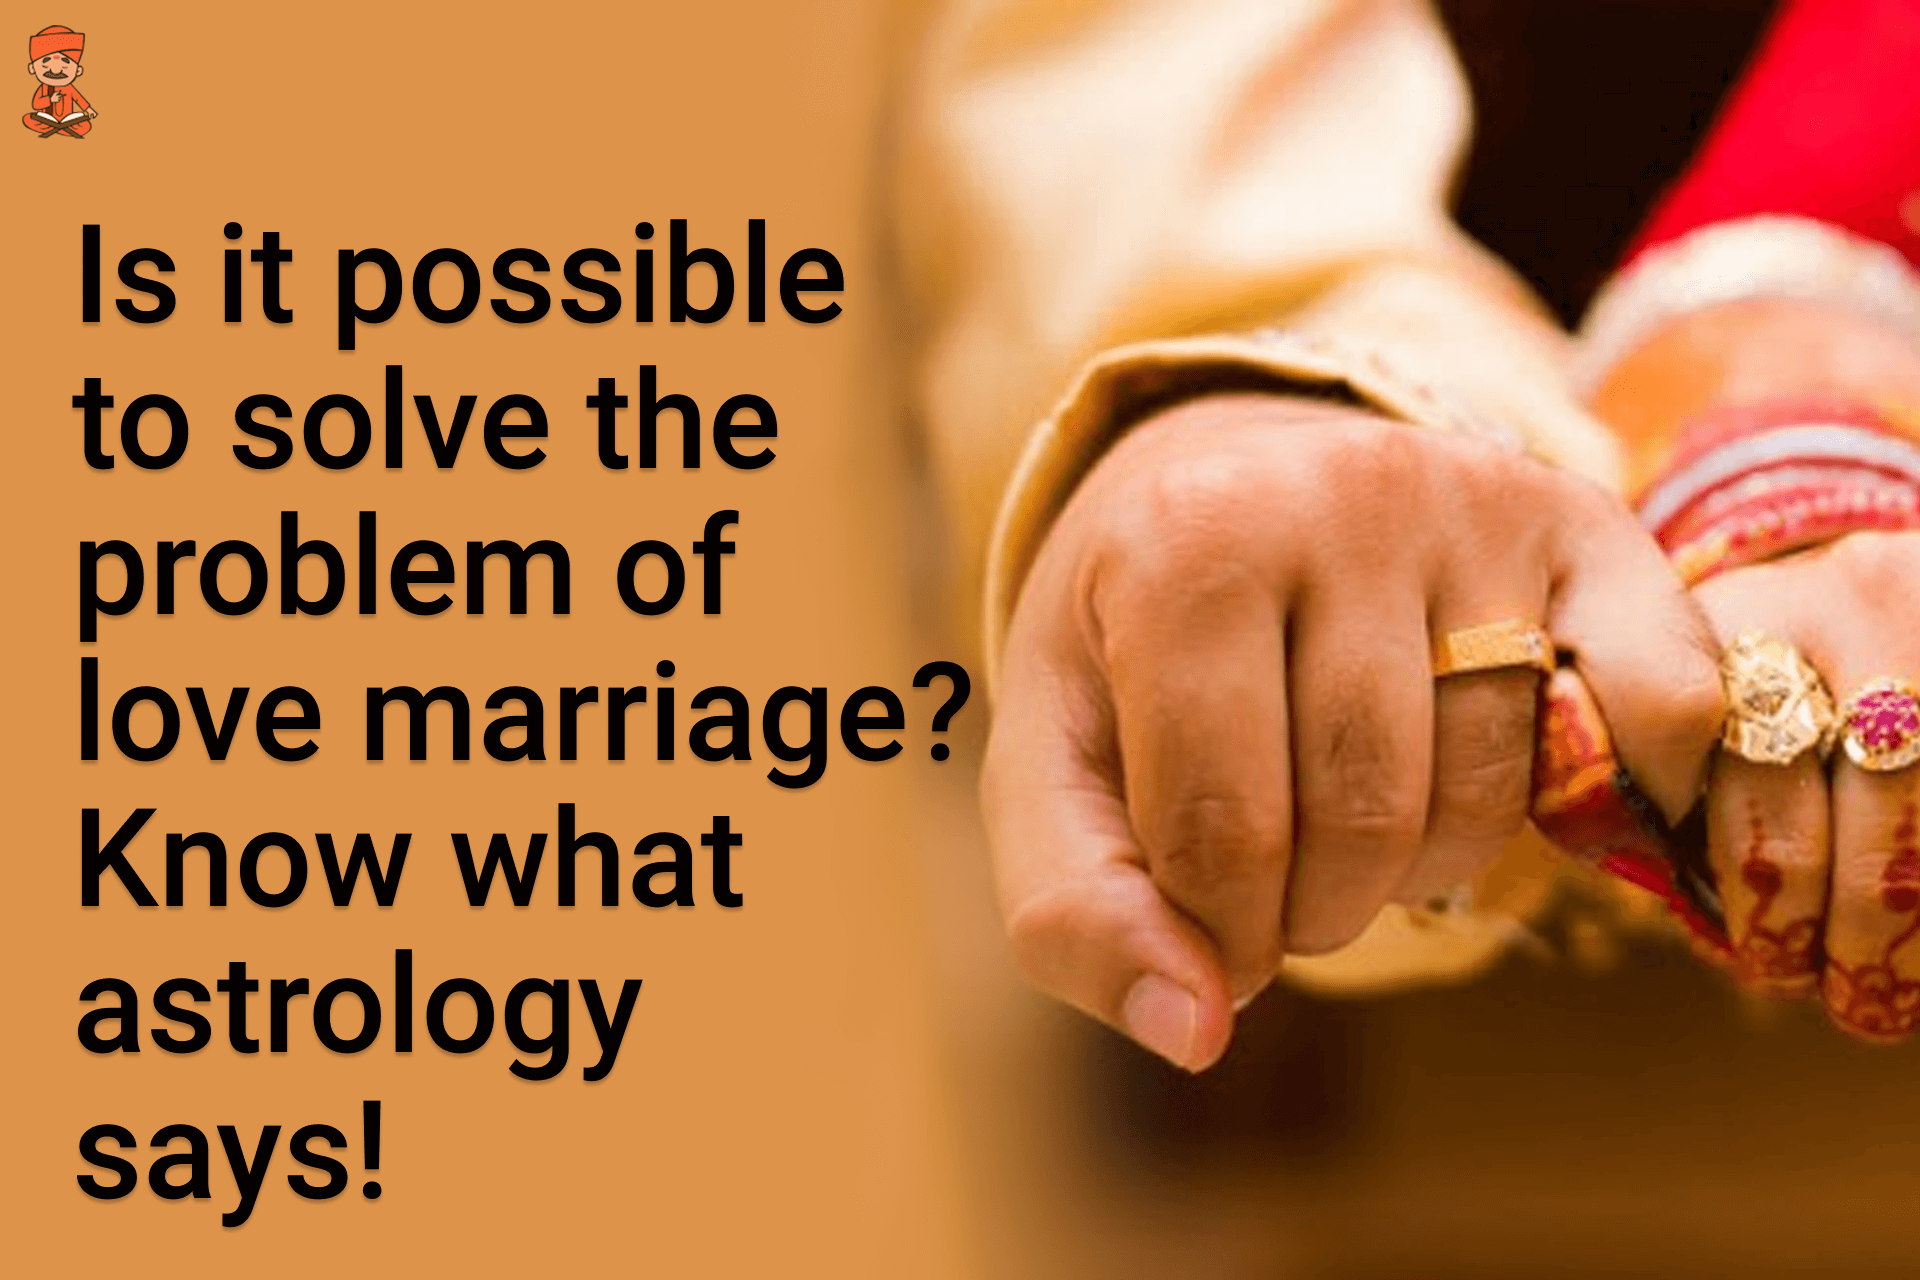 Is It Possible To Solve The Problem Of Love Marriage? Know What Astrology Says!